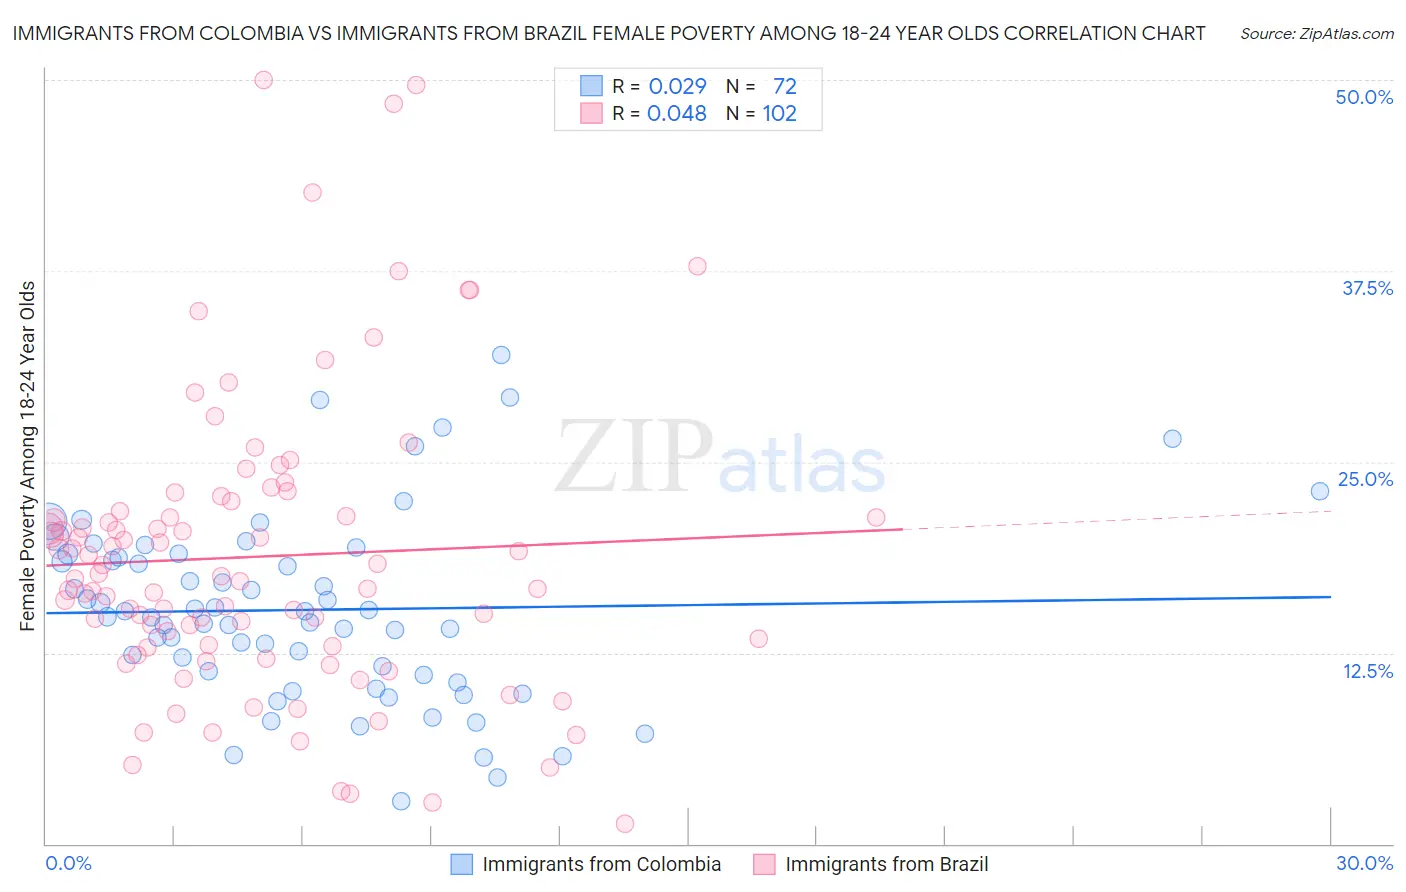 Immigrants from Colombia vs Immigrants from Brazil Female Poverty Among 18-24 Year Olds